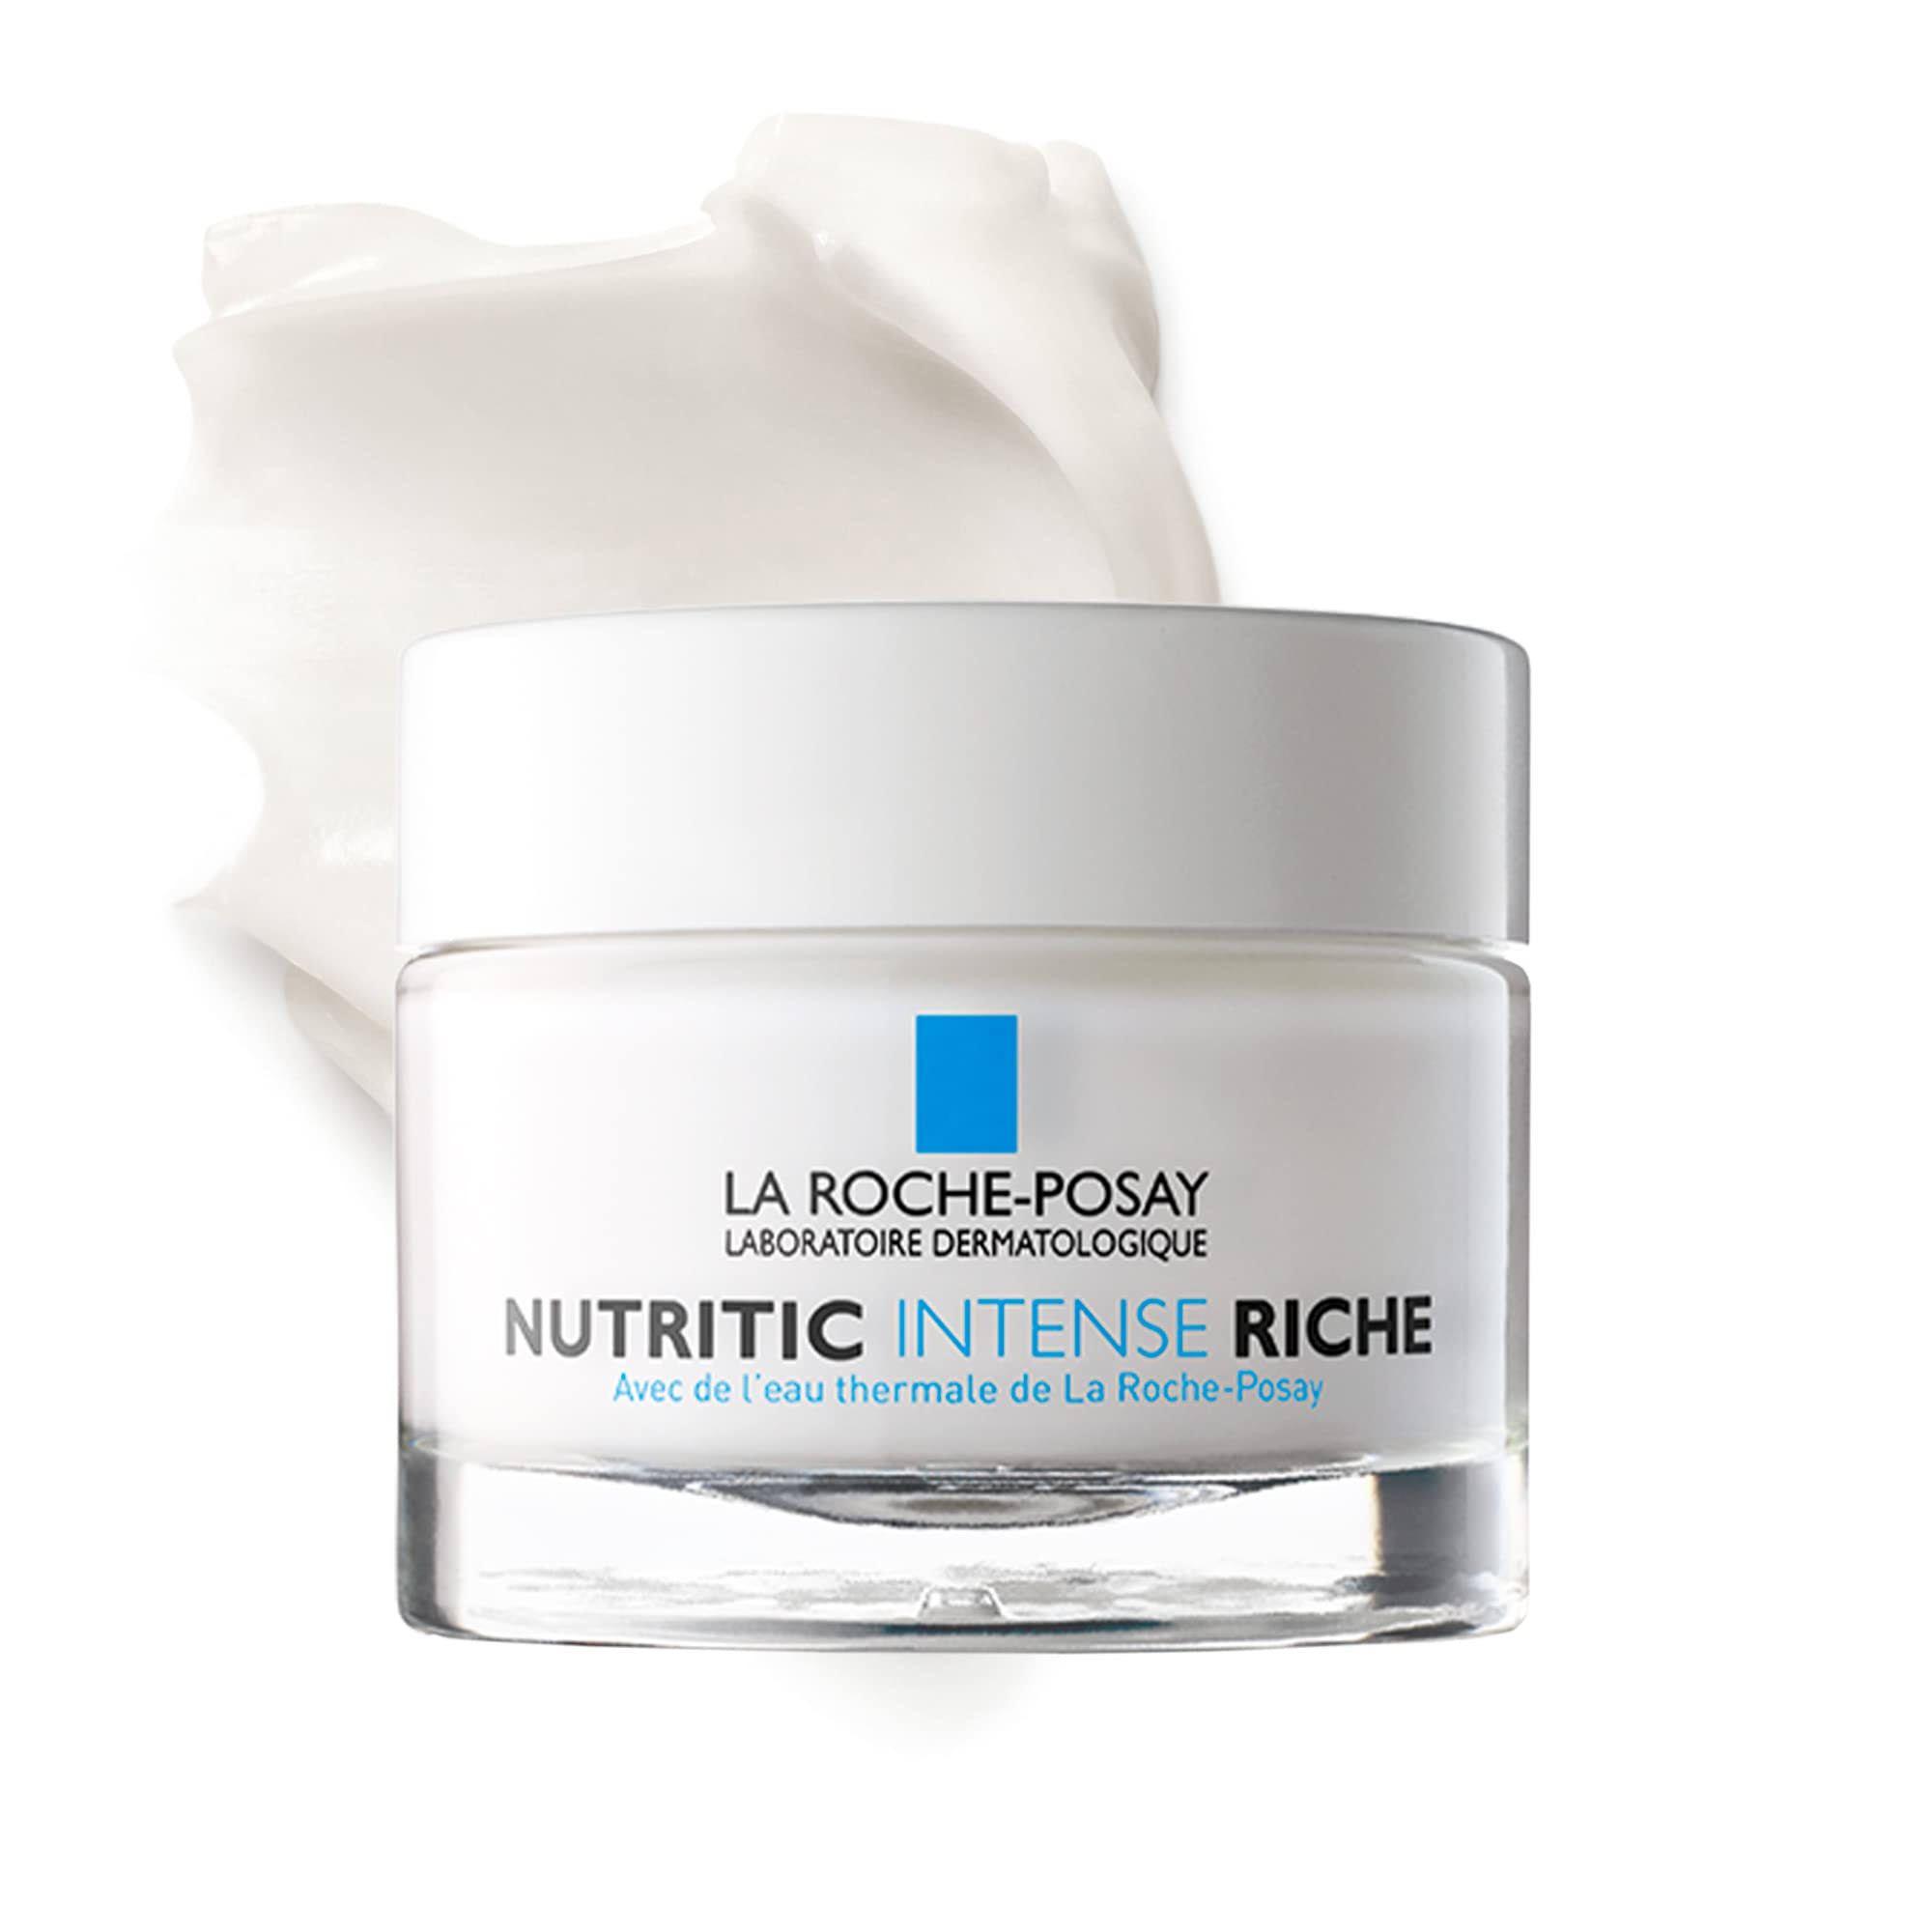 La Roche-Posay Nutritic Intense Rich In-Depth Nutri-Reconstituting Cream - with Thermal Water, 50ml